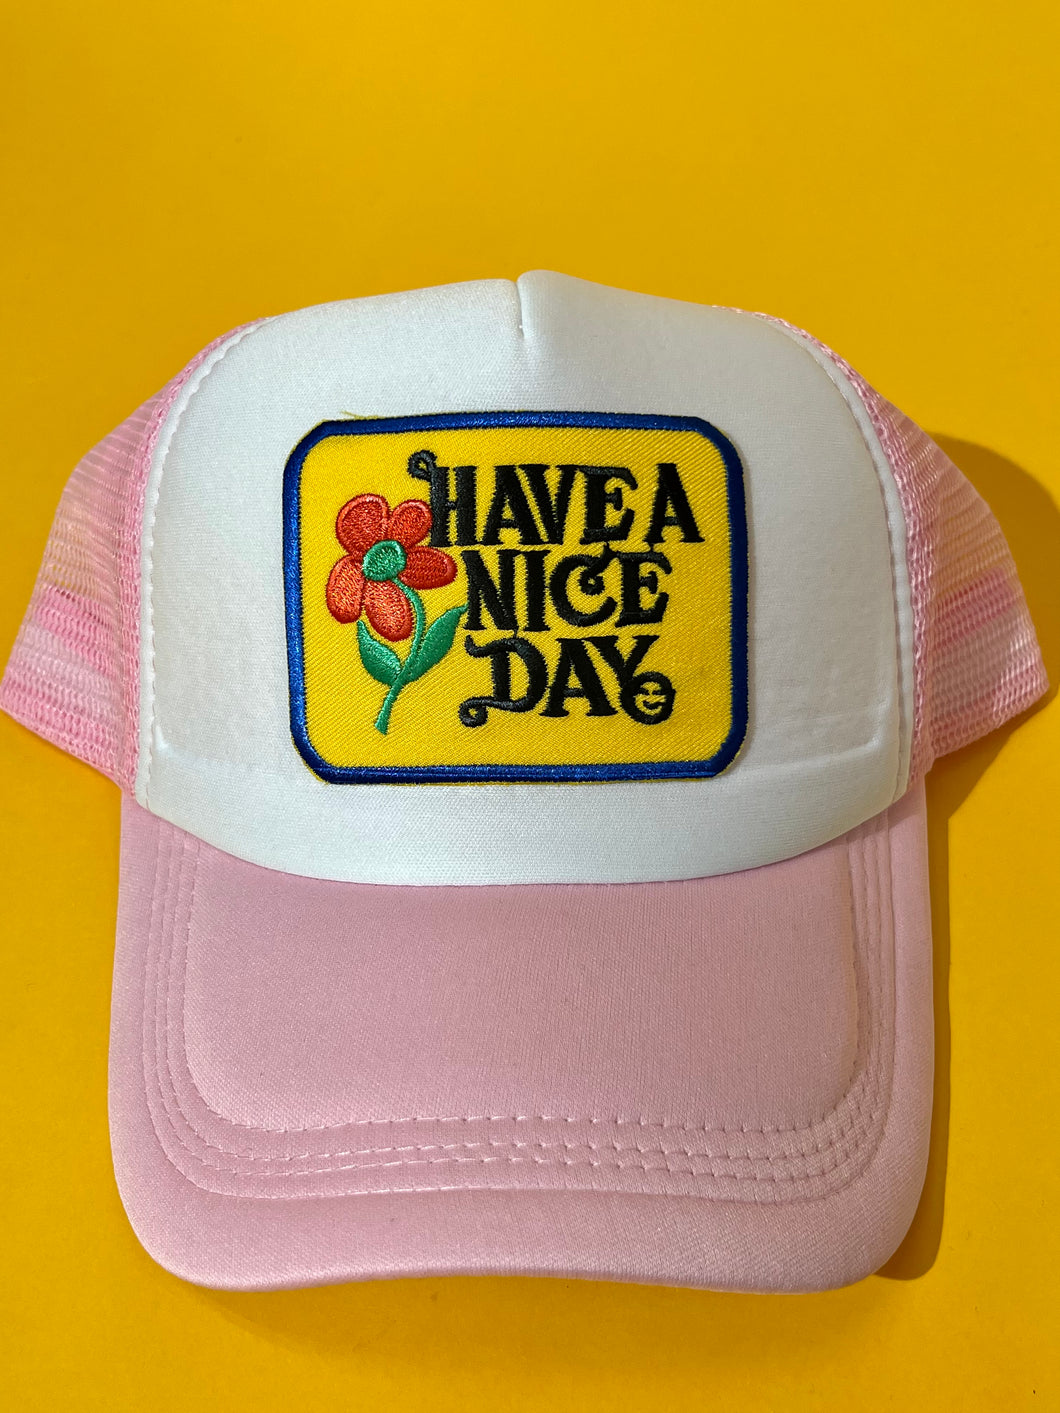 Have a nice day Pink Trucker hat